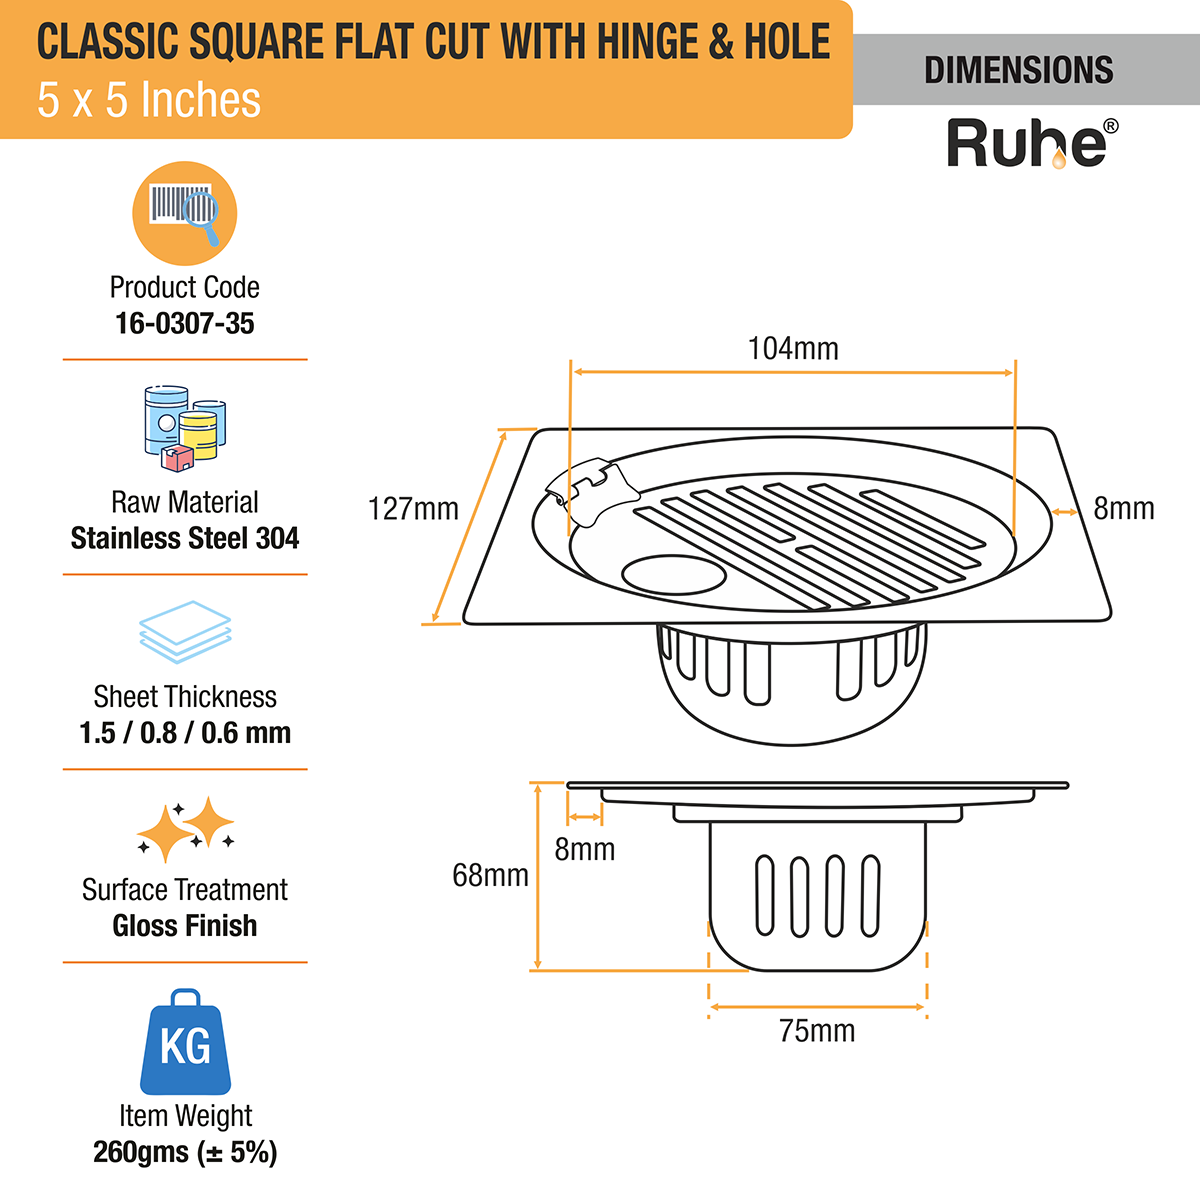 Classic Square Flat Cut Floor Drain (5 x 5 Inches) with Hinge, Hole and Cockroach Trap (304 Grade) dimensions and size